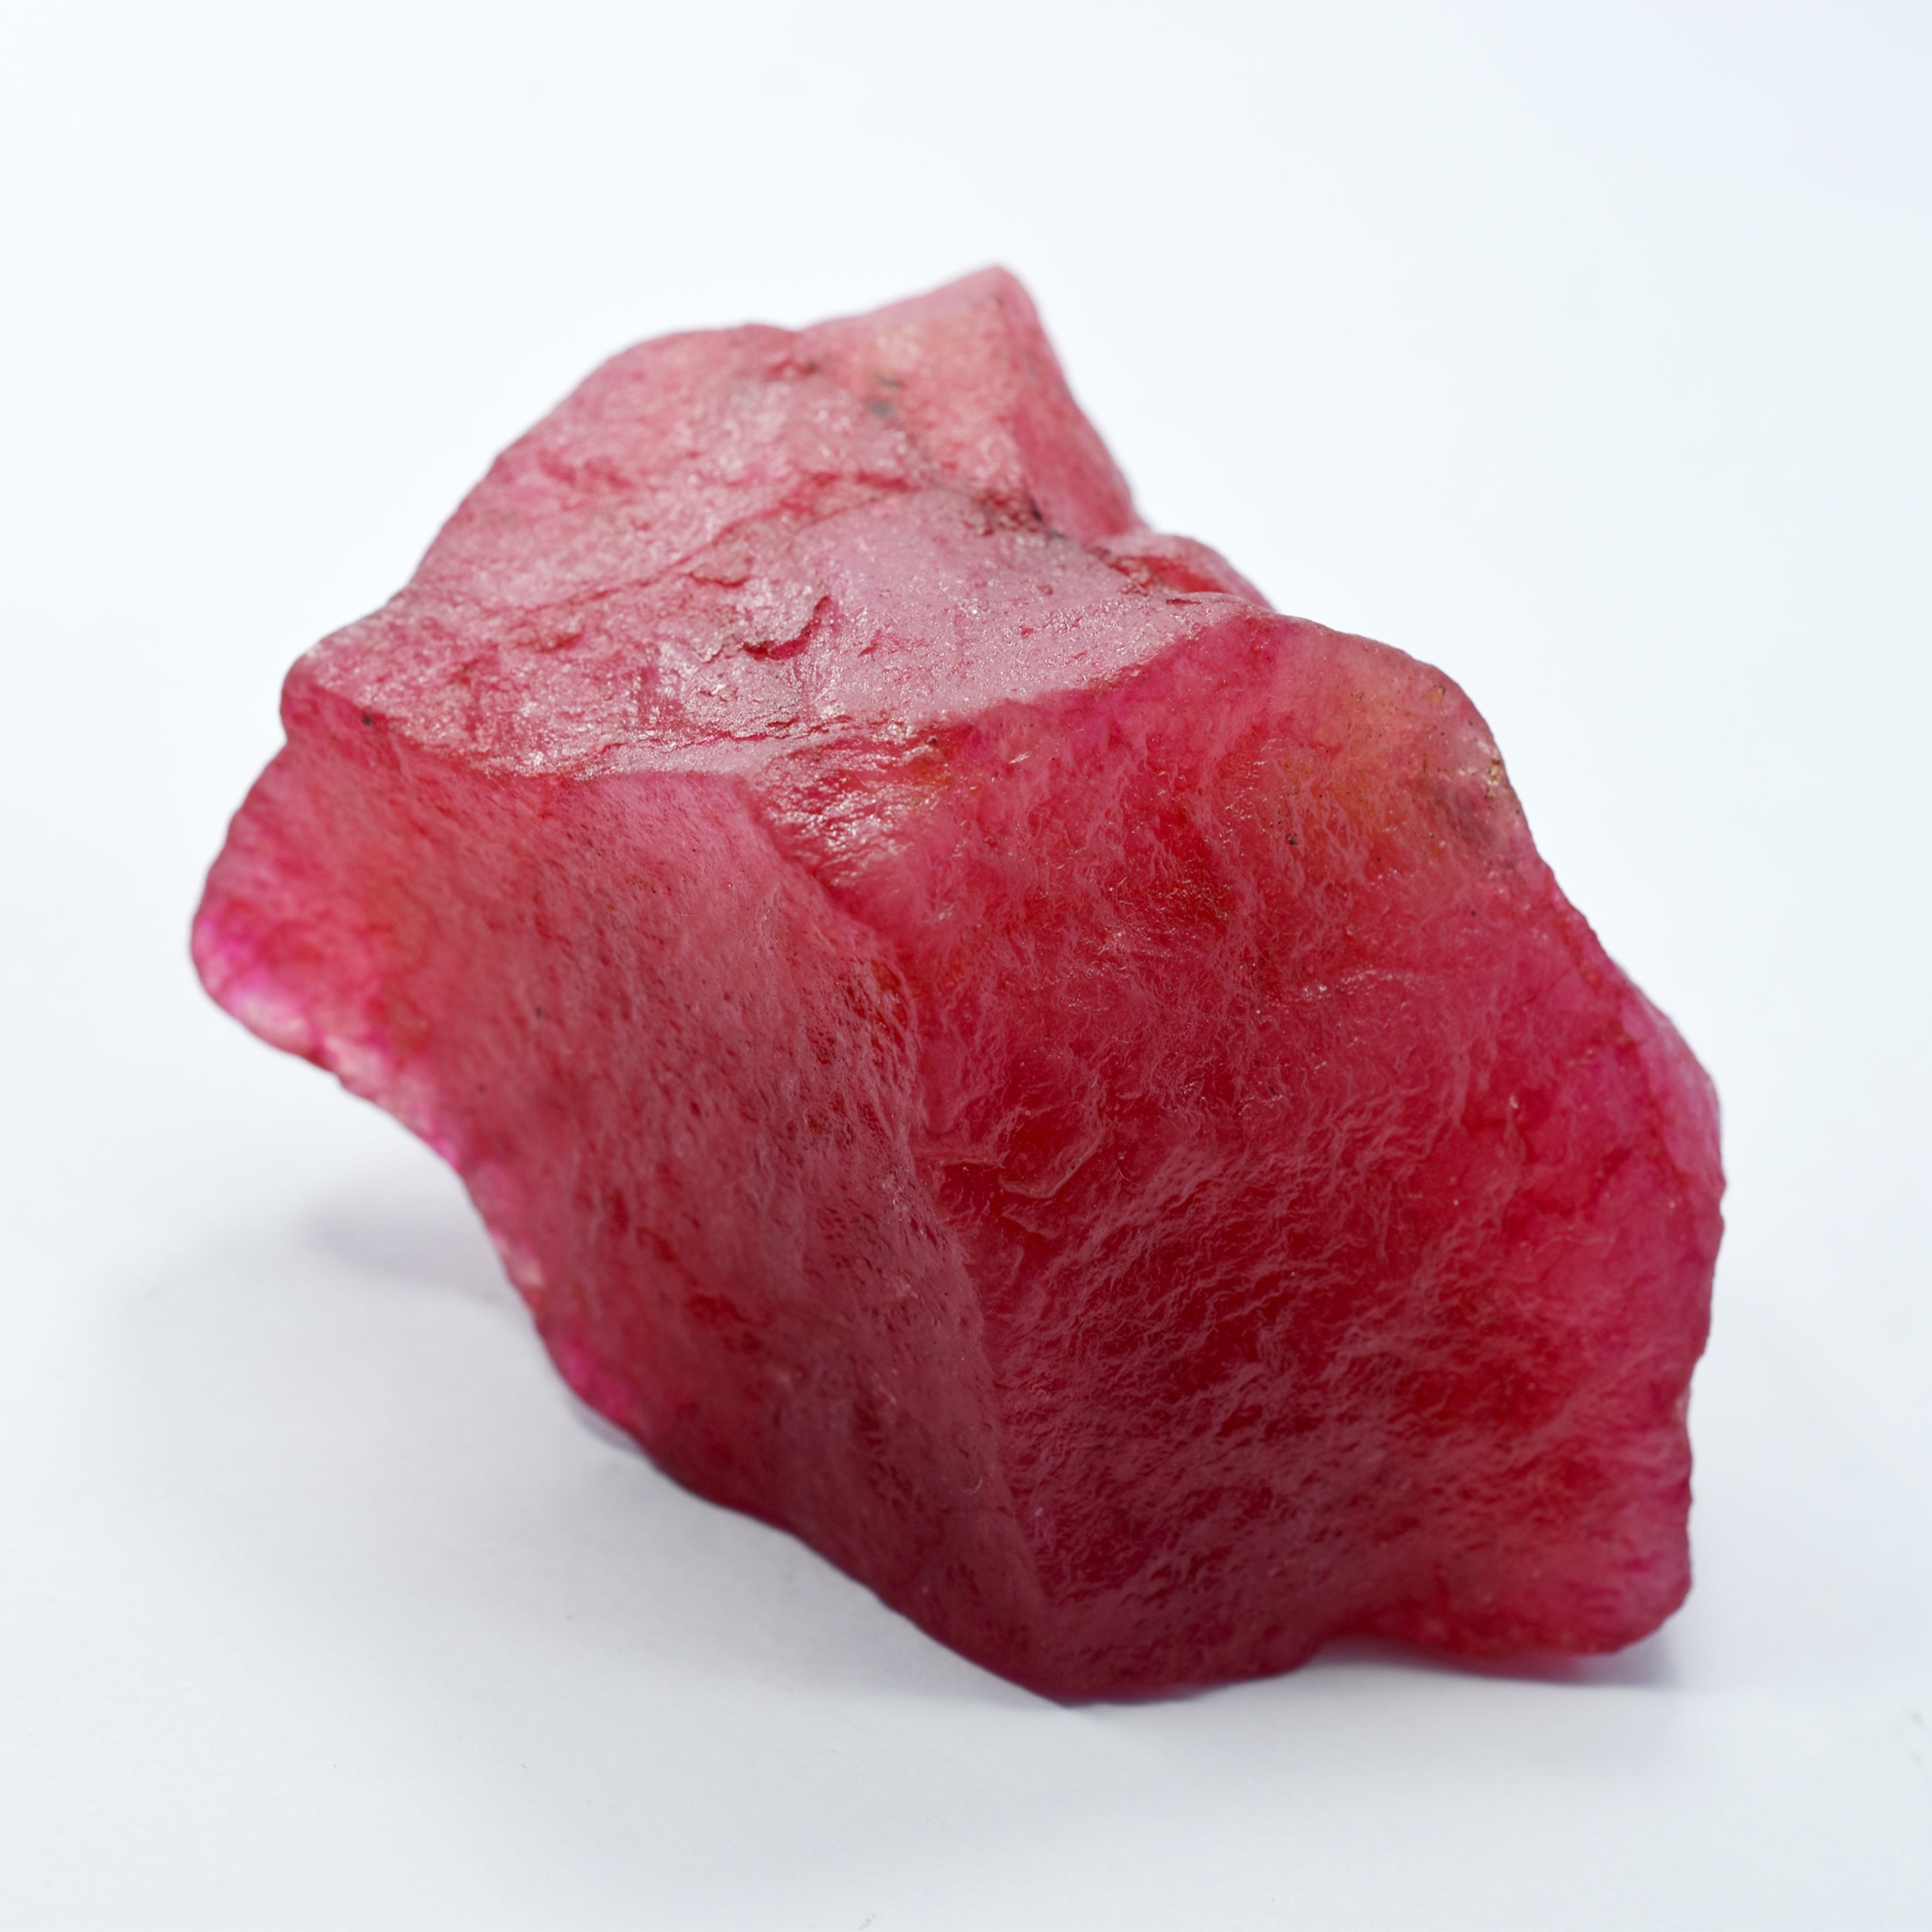 On Sale !! Huge Ruby Red Rough 995.65 Ct Natural Red Ruby Uncut Raw Rough Natural Certified Loose Gemstone | A+ Quality Ruby Rough | Best Price